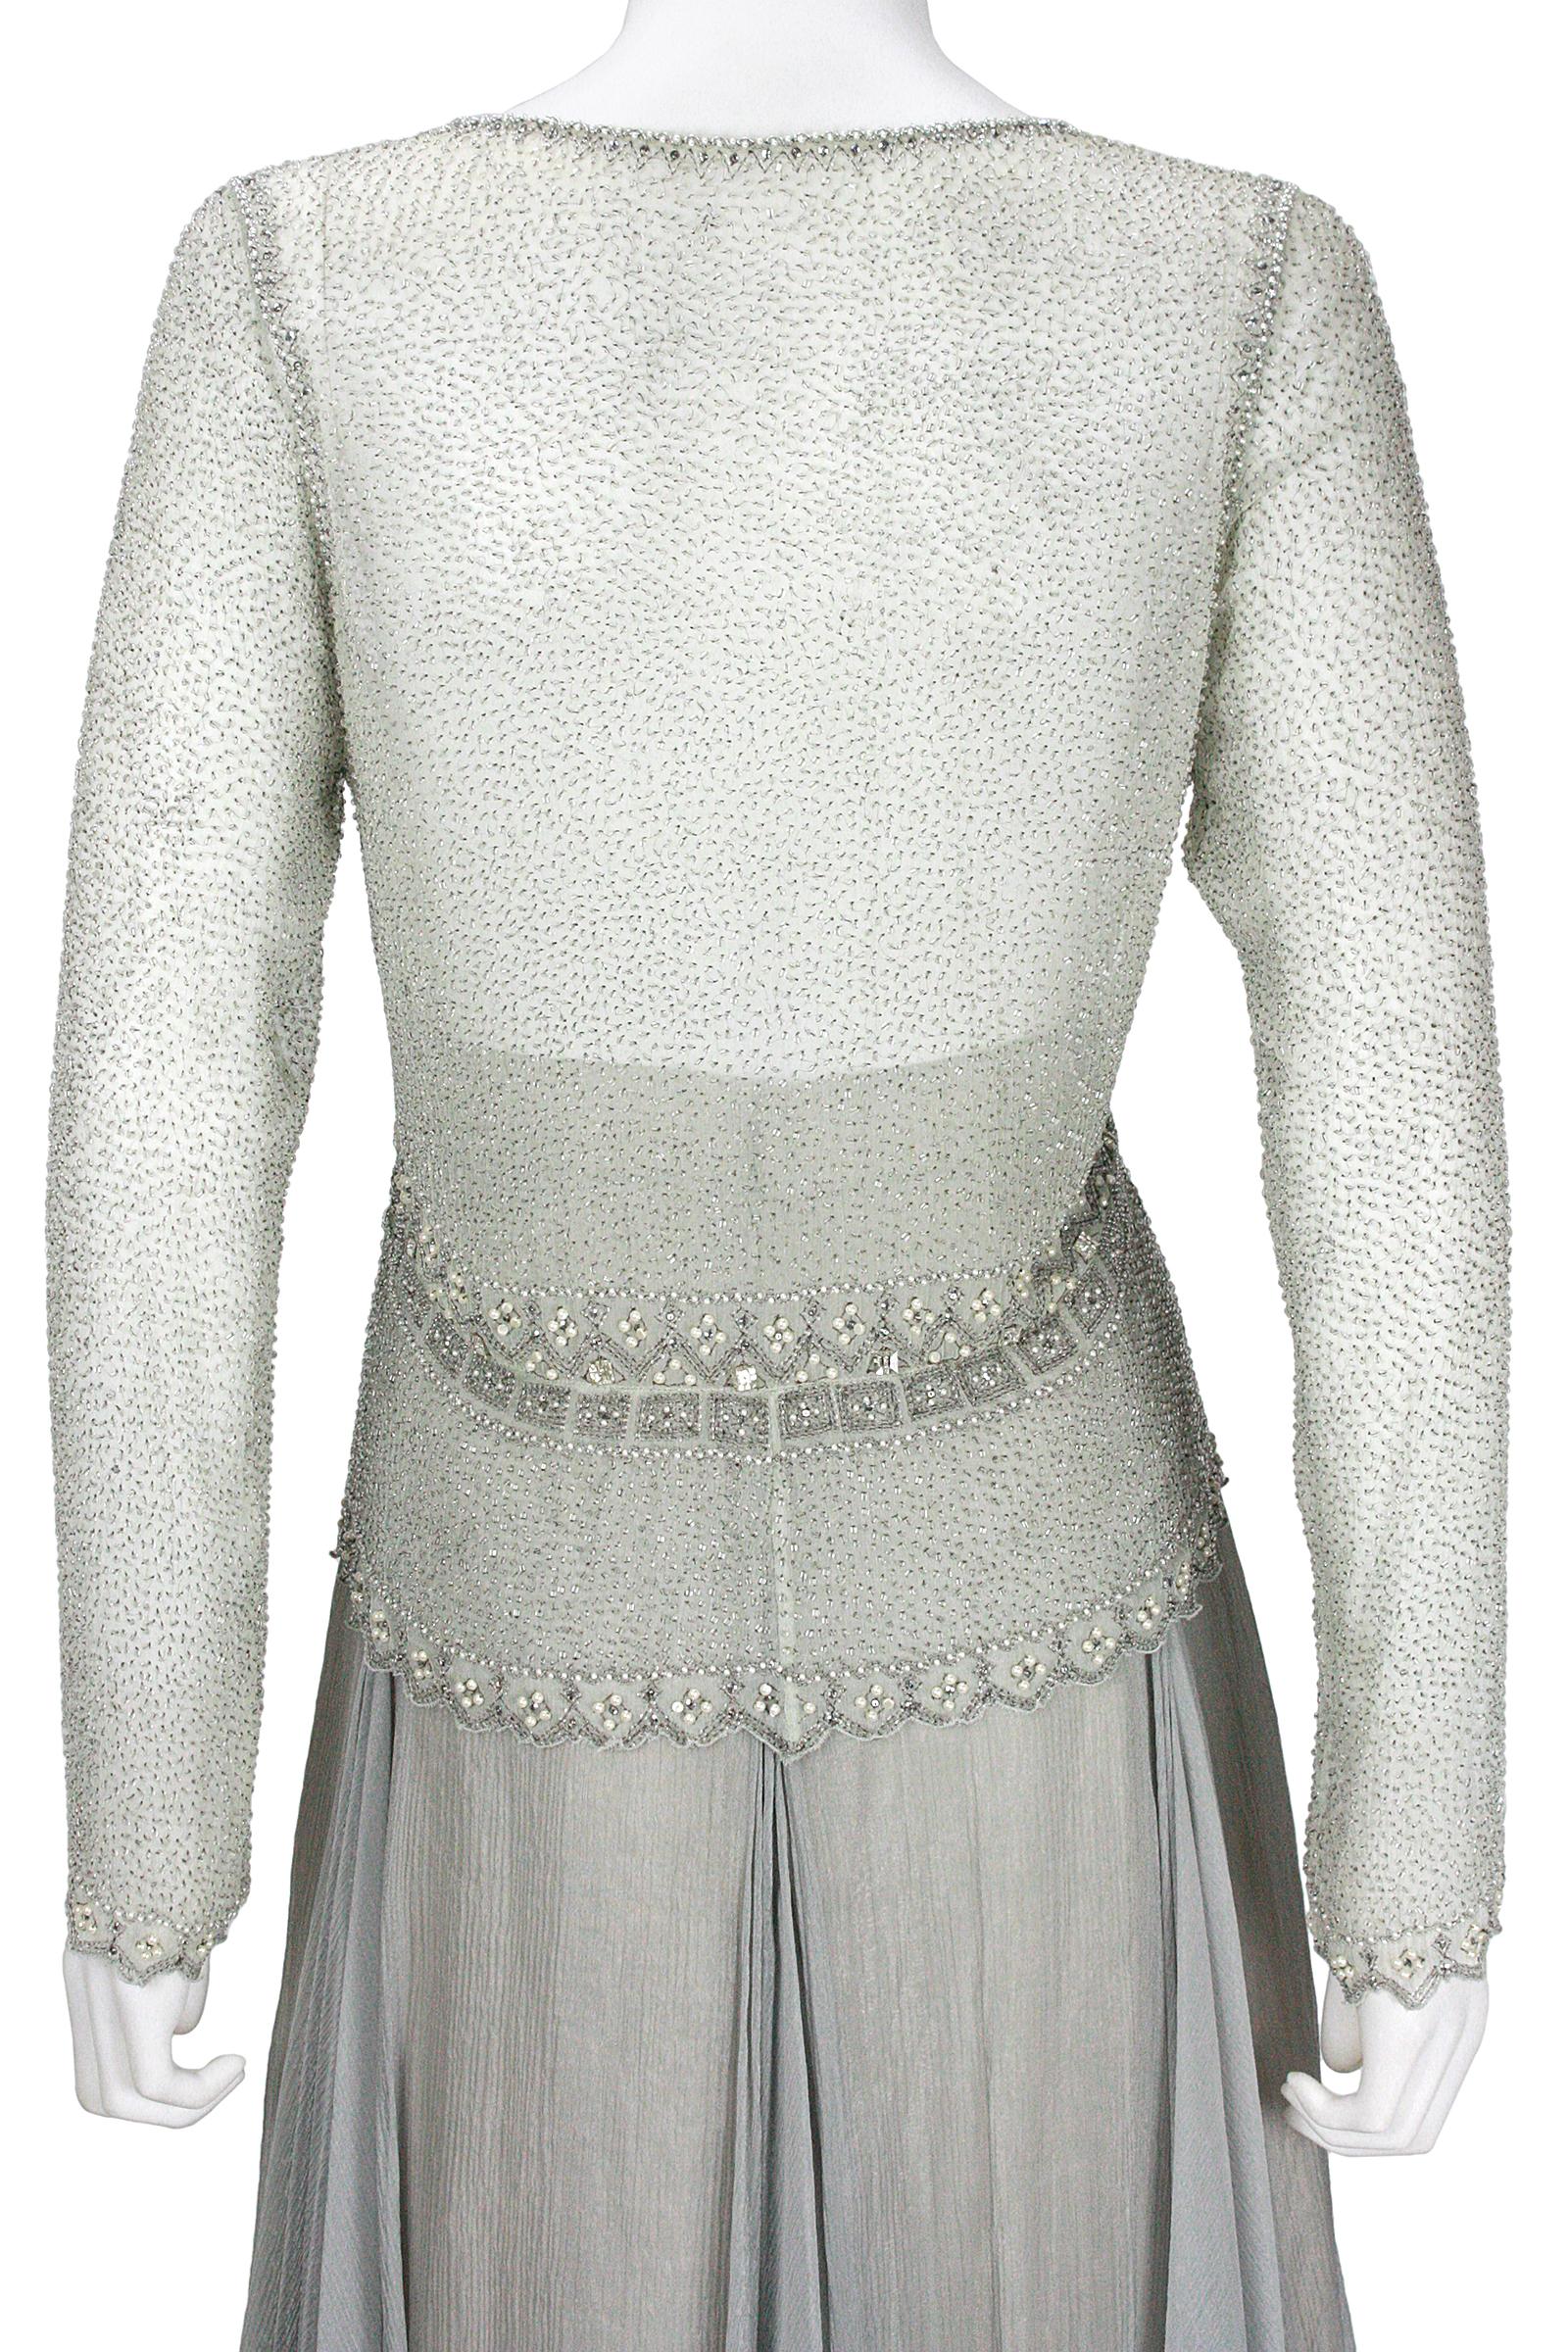 Eavis & Brown London Seafoam Chiffon Beaded Top and Long Silver Skirt  For Sale 3